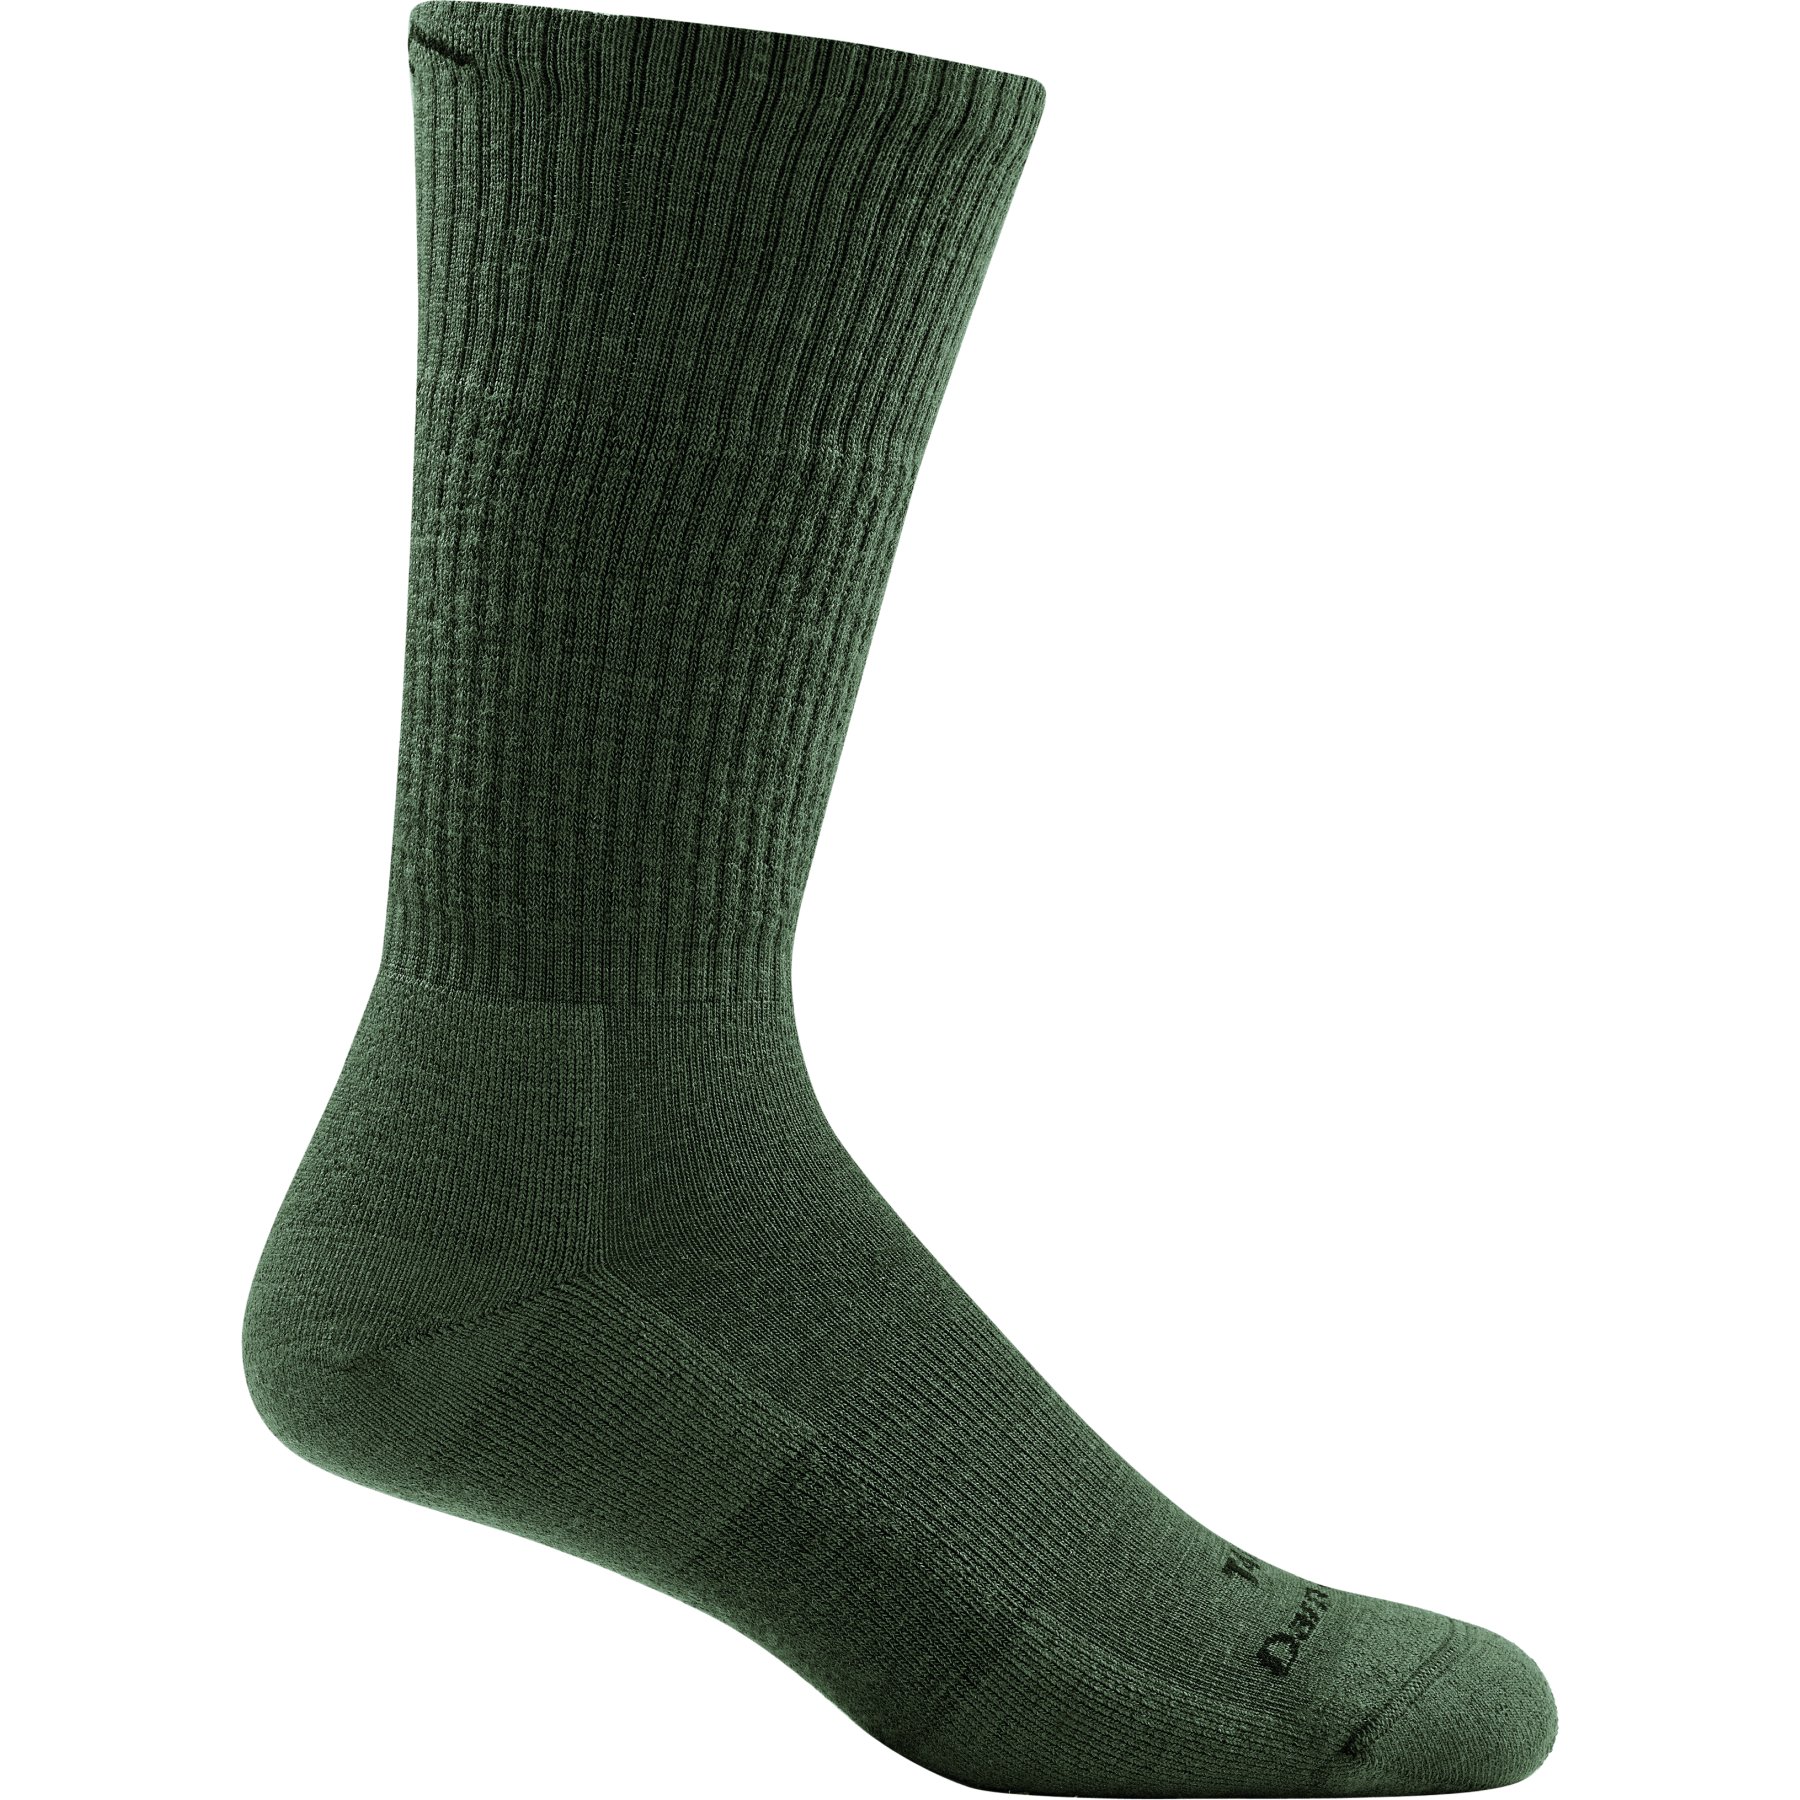 Picture of Darn Tough T4021 Tactical Boot Midweight Socks With Cushion - Foliage Green